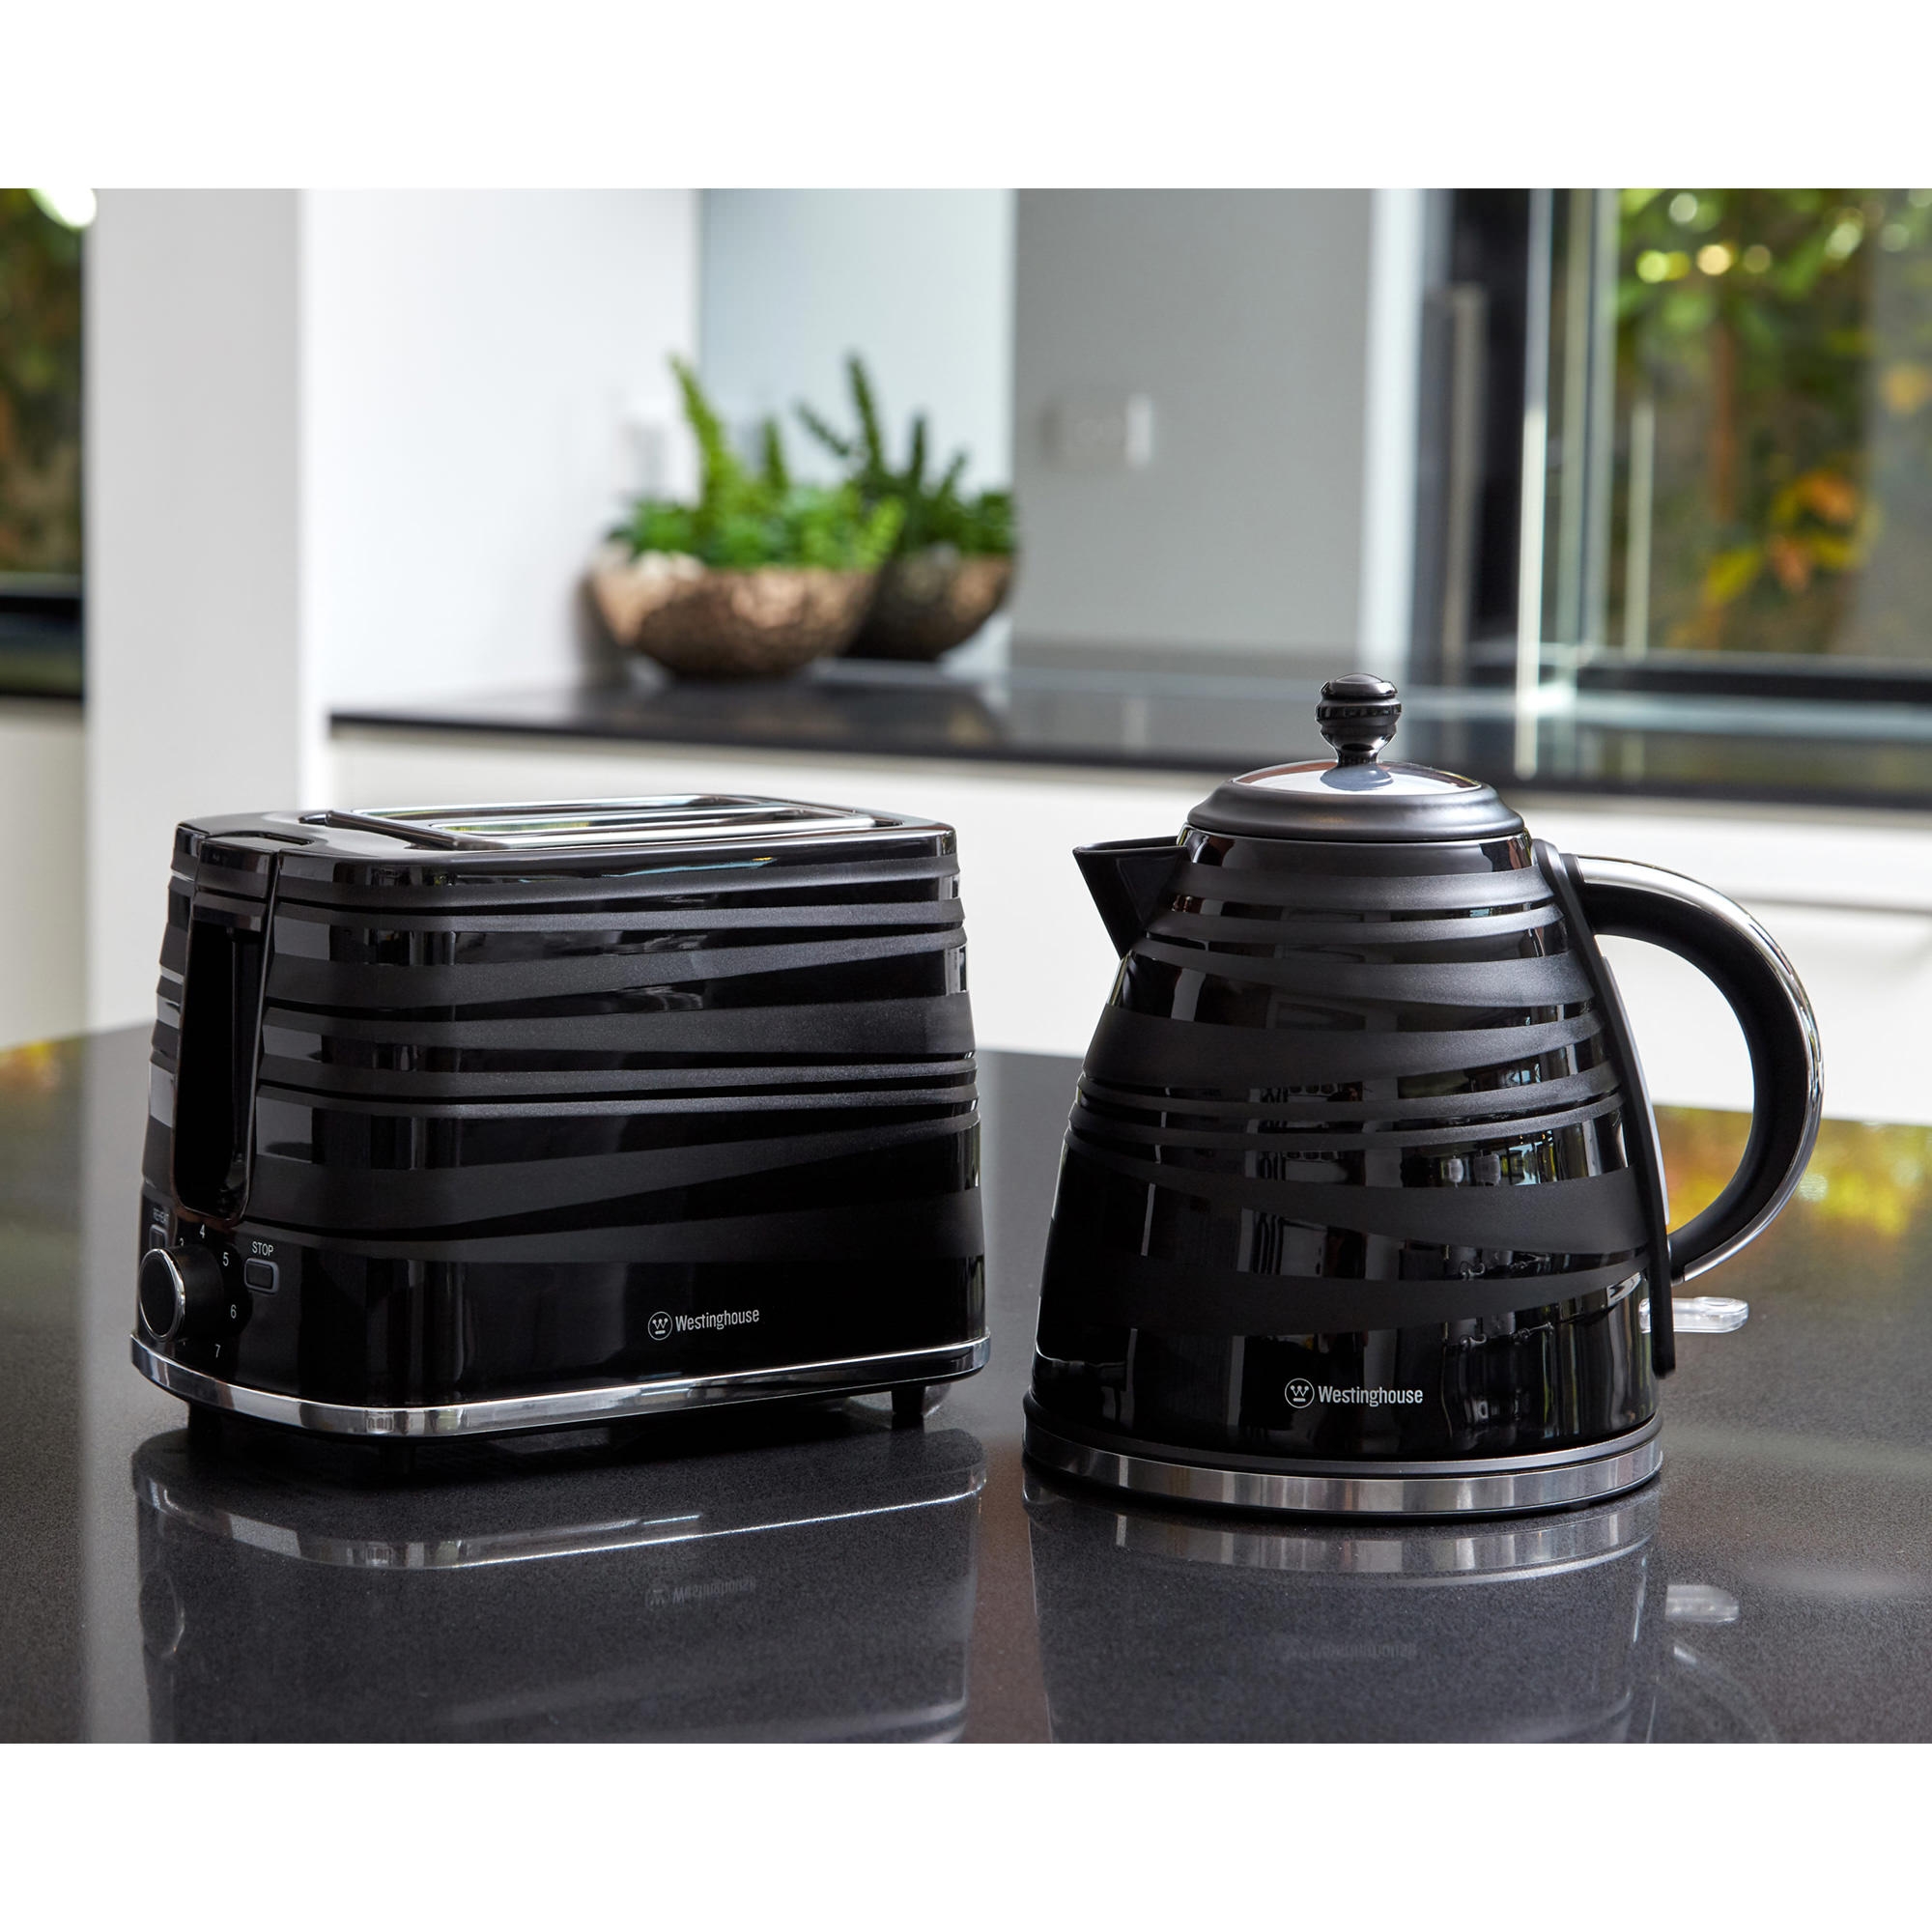 Westinghouse Kettle and Toaster Pack Black Image 2